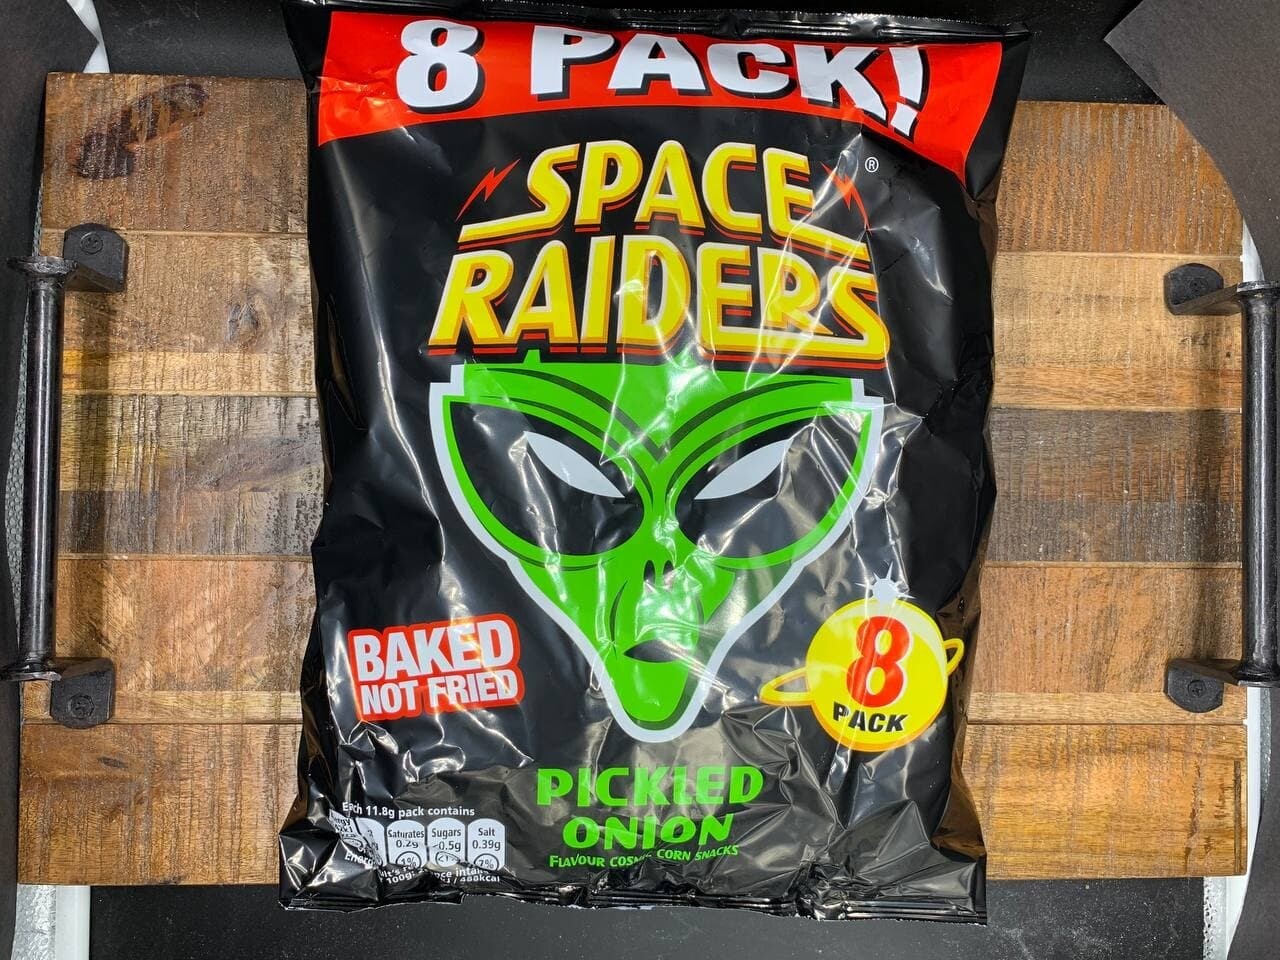 Space Raiders Pickled Onion 8 Pack